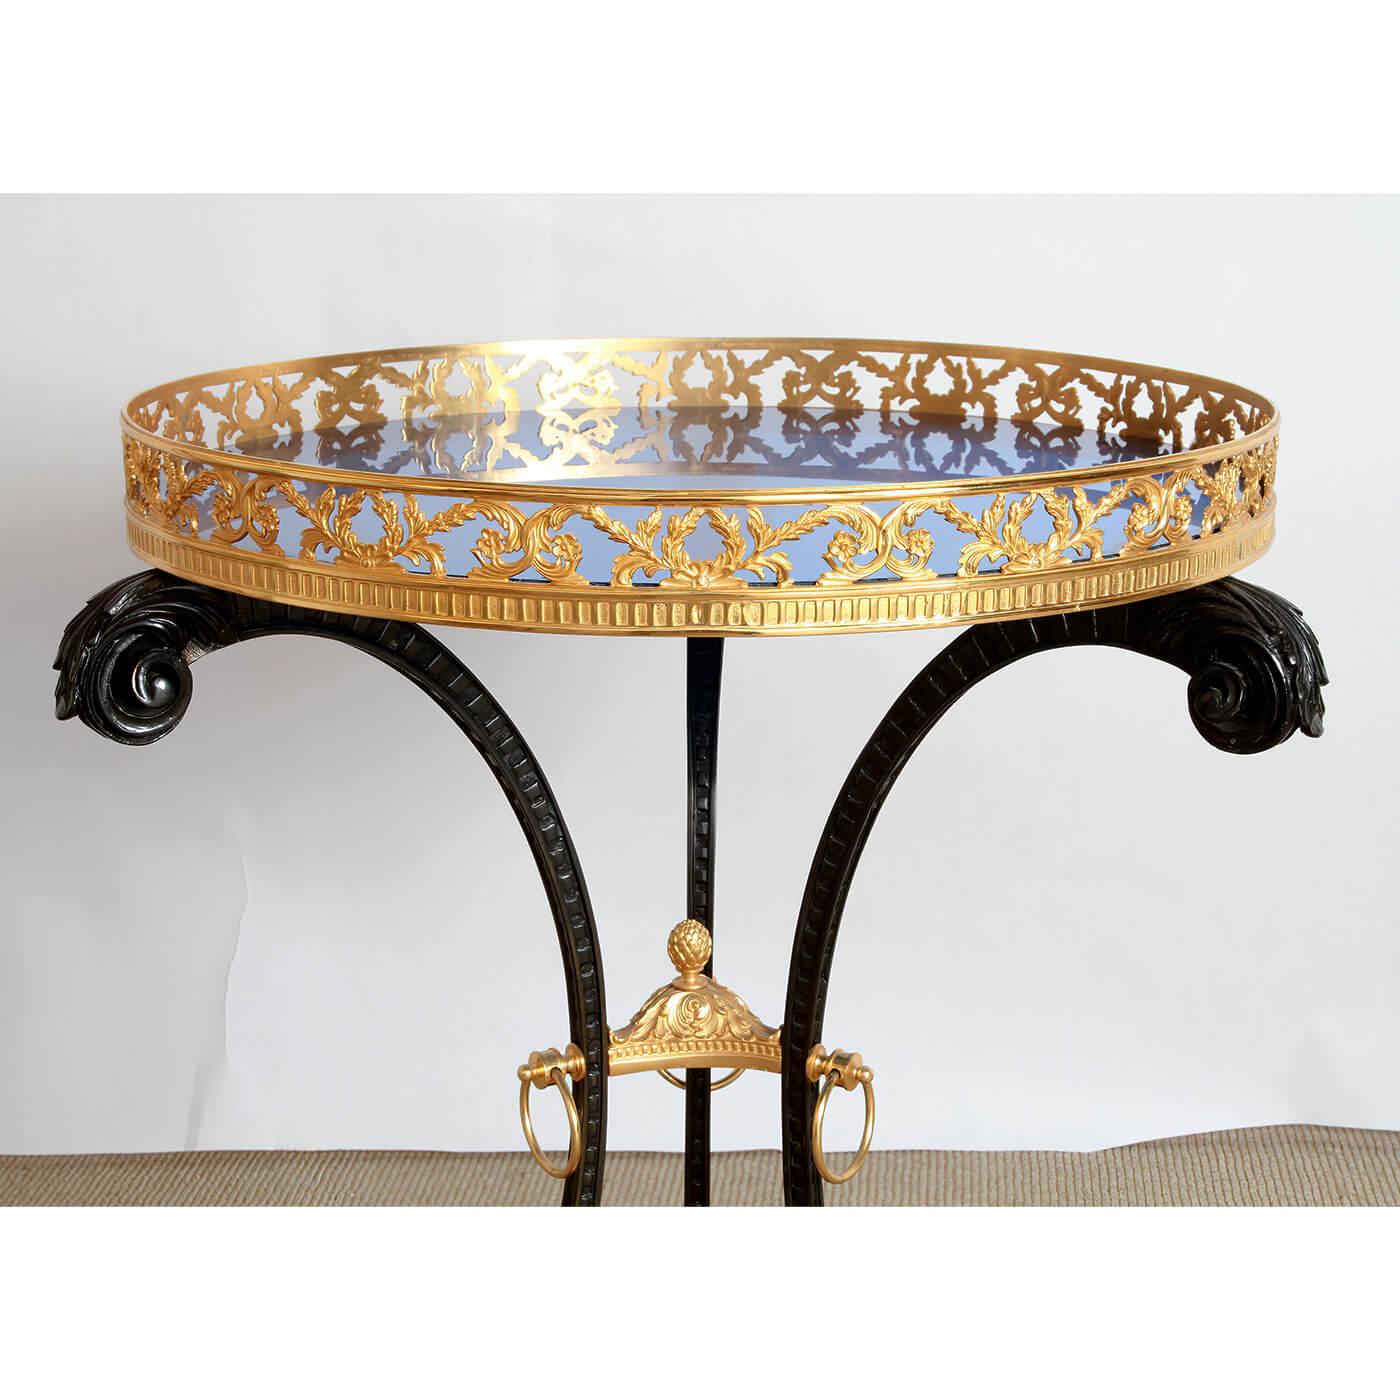 An unusual Russin Neo-Classic style bronze Gueridon with an ormolu pierced bronze gallery, a transparent cobalt glass circular table top, with a patented bronze scrolling legs centered by an ormolu bronze acanthus and acorn stretcher. 20th